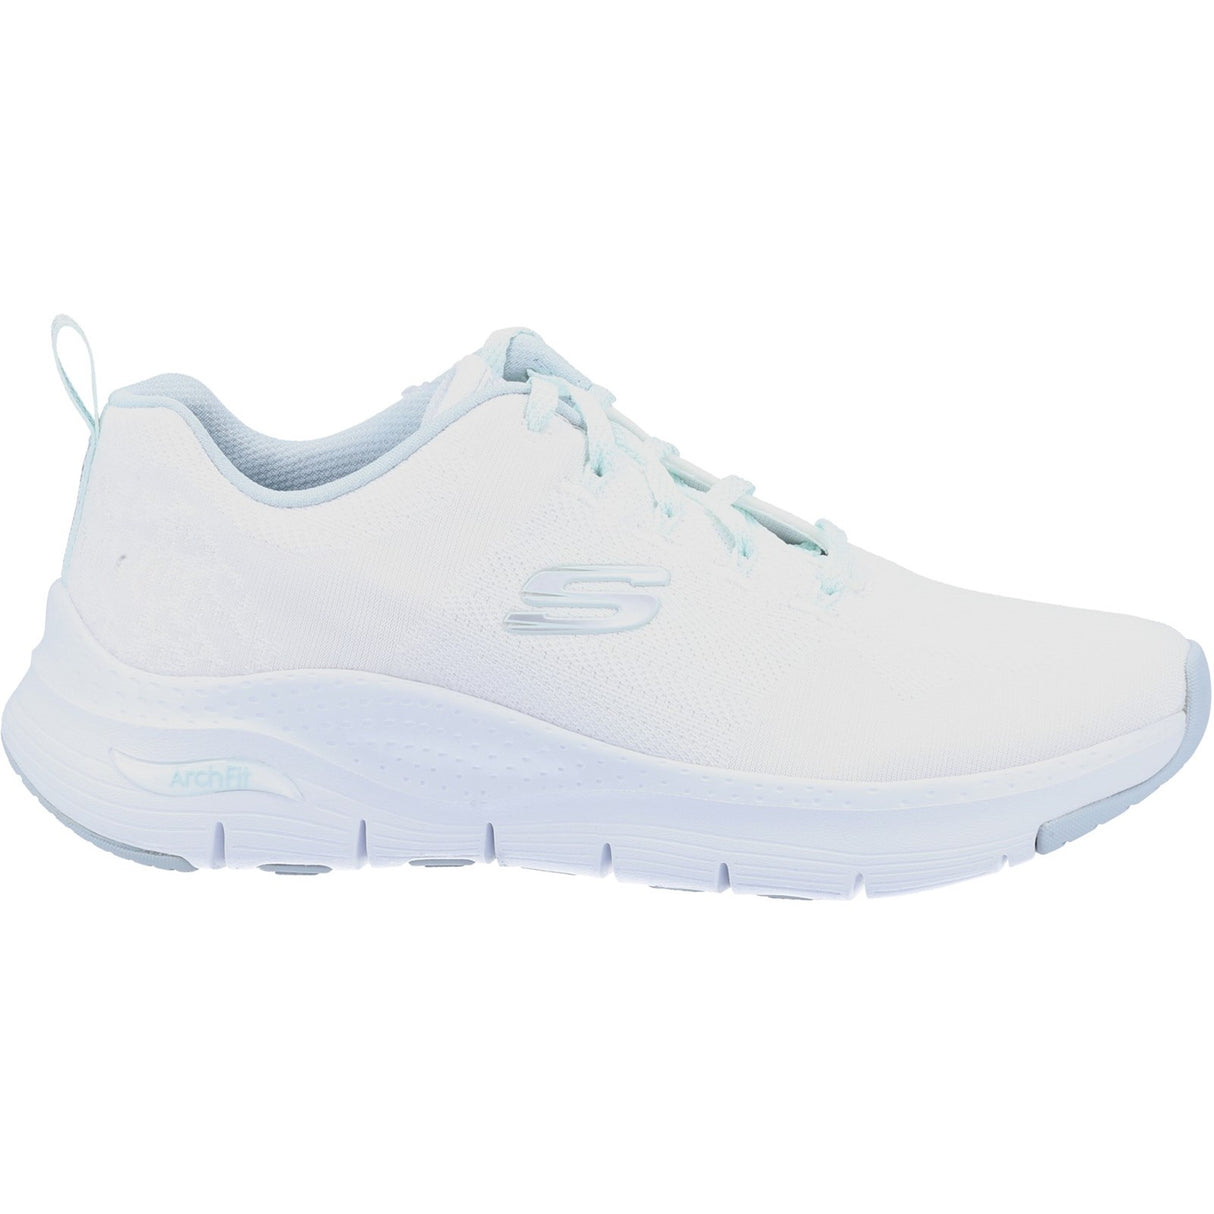 Skechers Arch Fit Comfy Wave Trainer